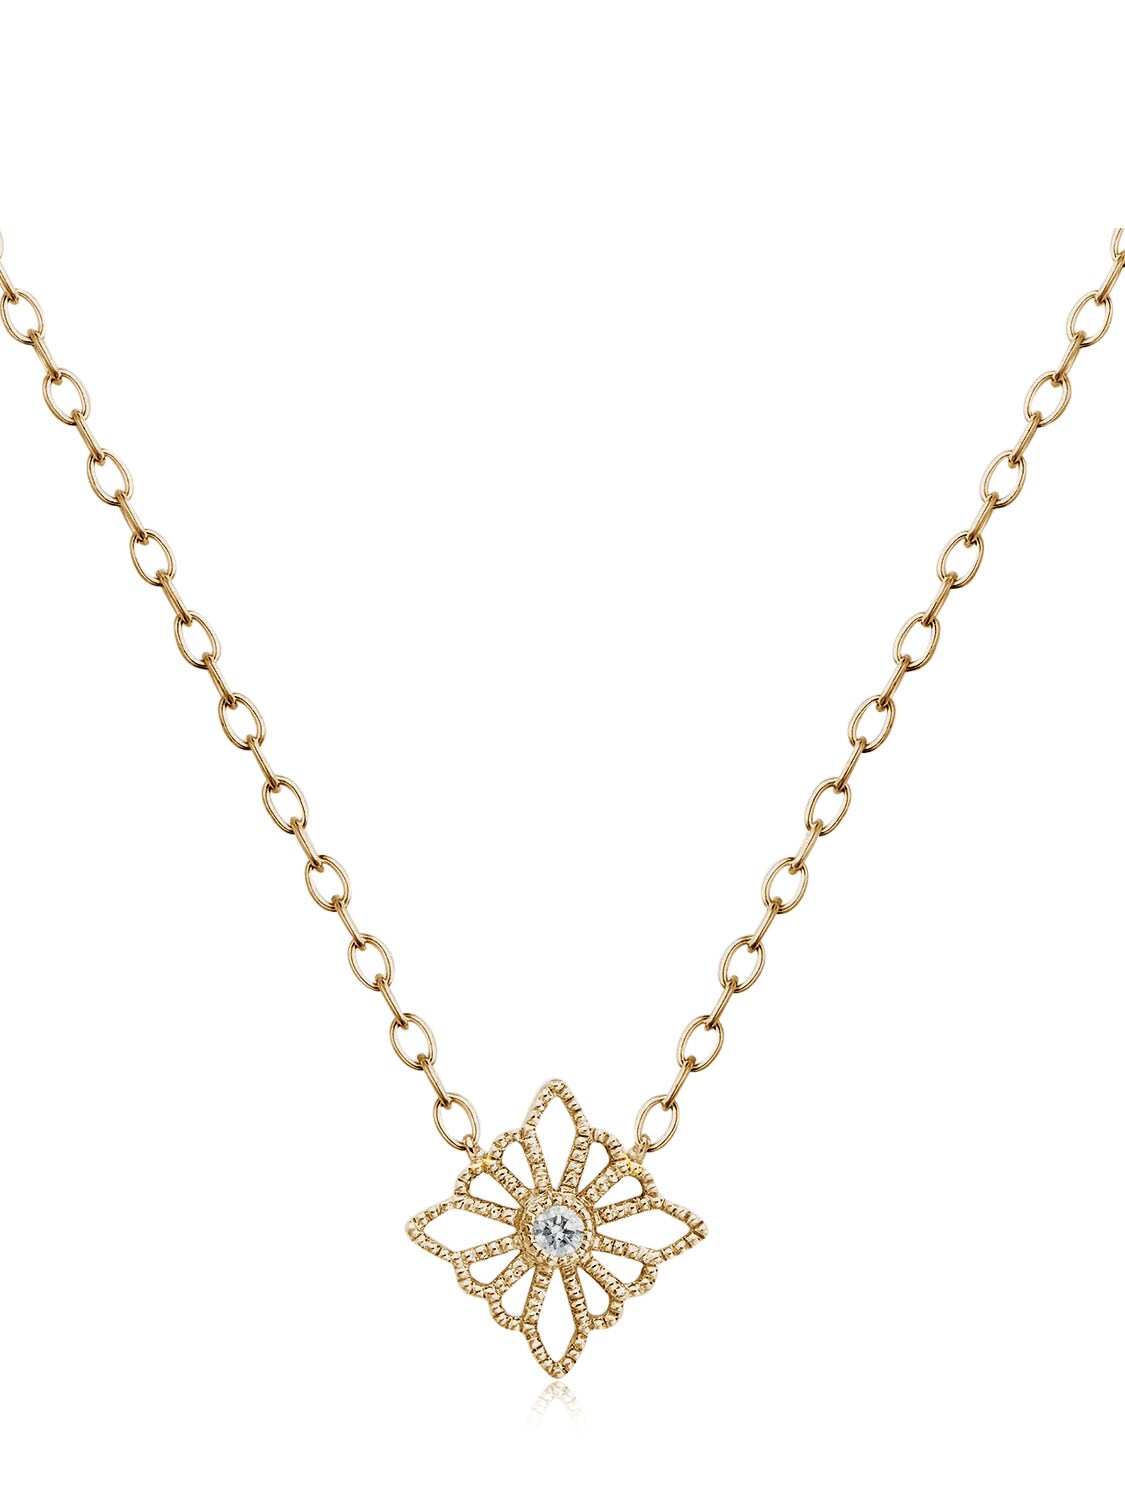 Stone Paris Madame Bovary Necklace In Gold